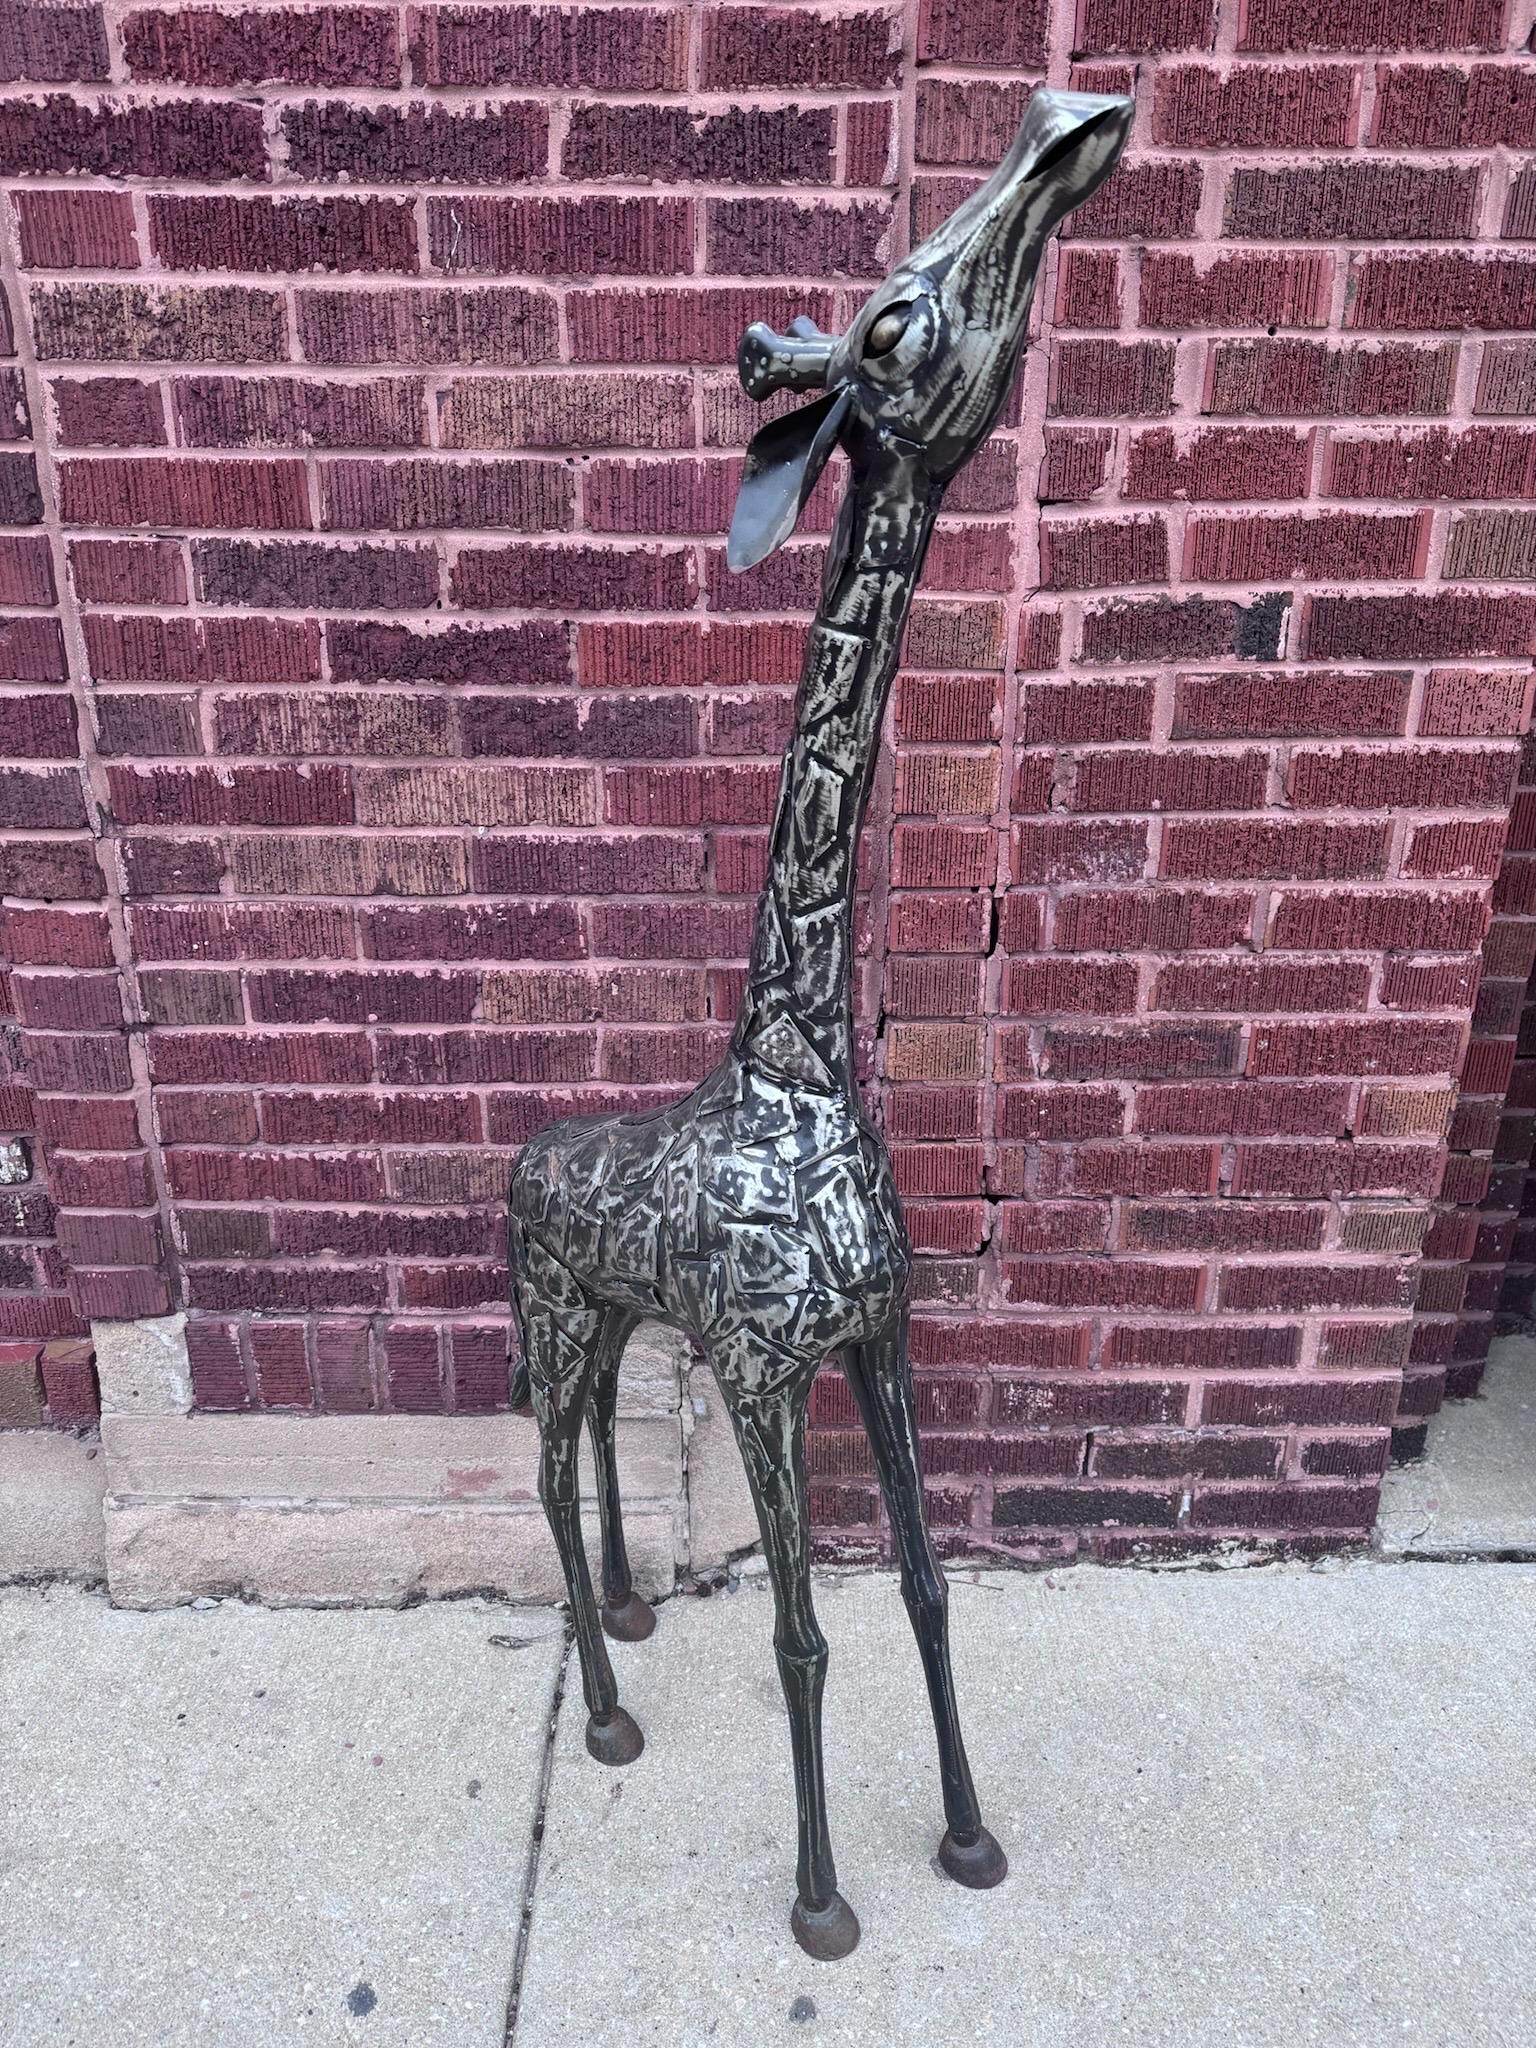 Vintage Modern Abstract Metal Matchwork Giraffe Patchwork Sculpture

Featuring a vintage baby giraffe sculpture in patchwork metal, welded, handcrafted and hand painted. Use in a nursery, outdoors or for any animal lover. 

Circa Mid 20th Century